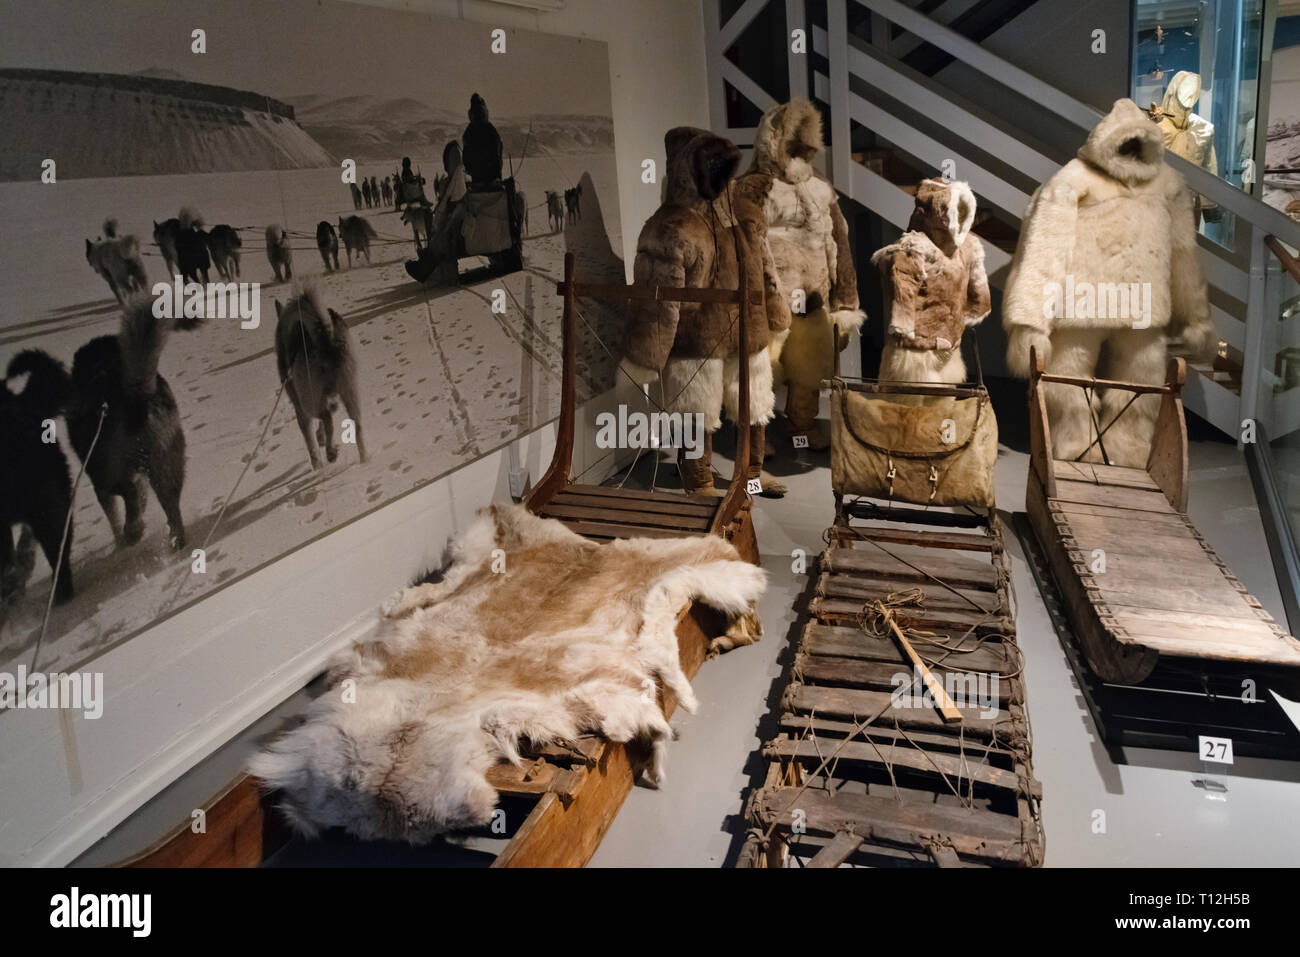 Clothing display of Inuit people's early life in the National Museum, Nuuk, Greenland Stock Photo